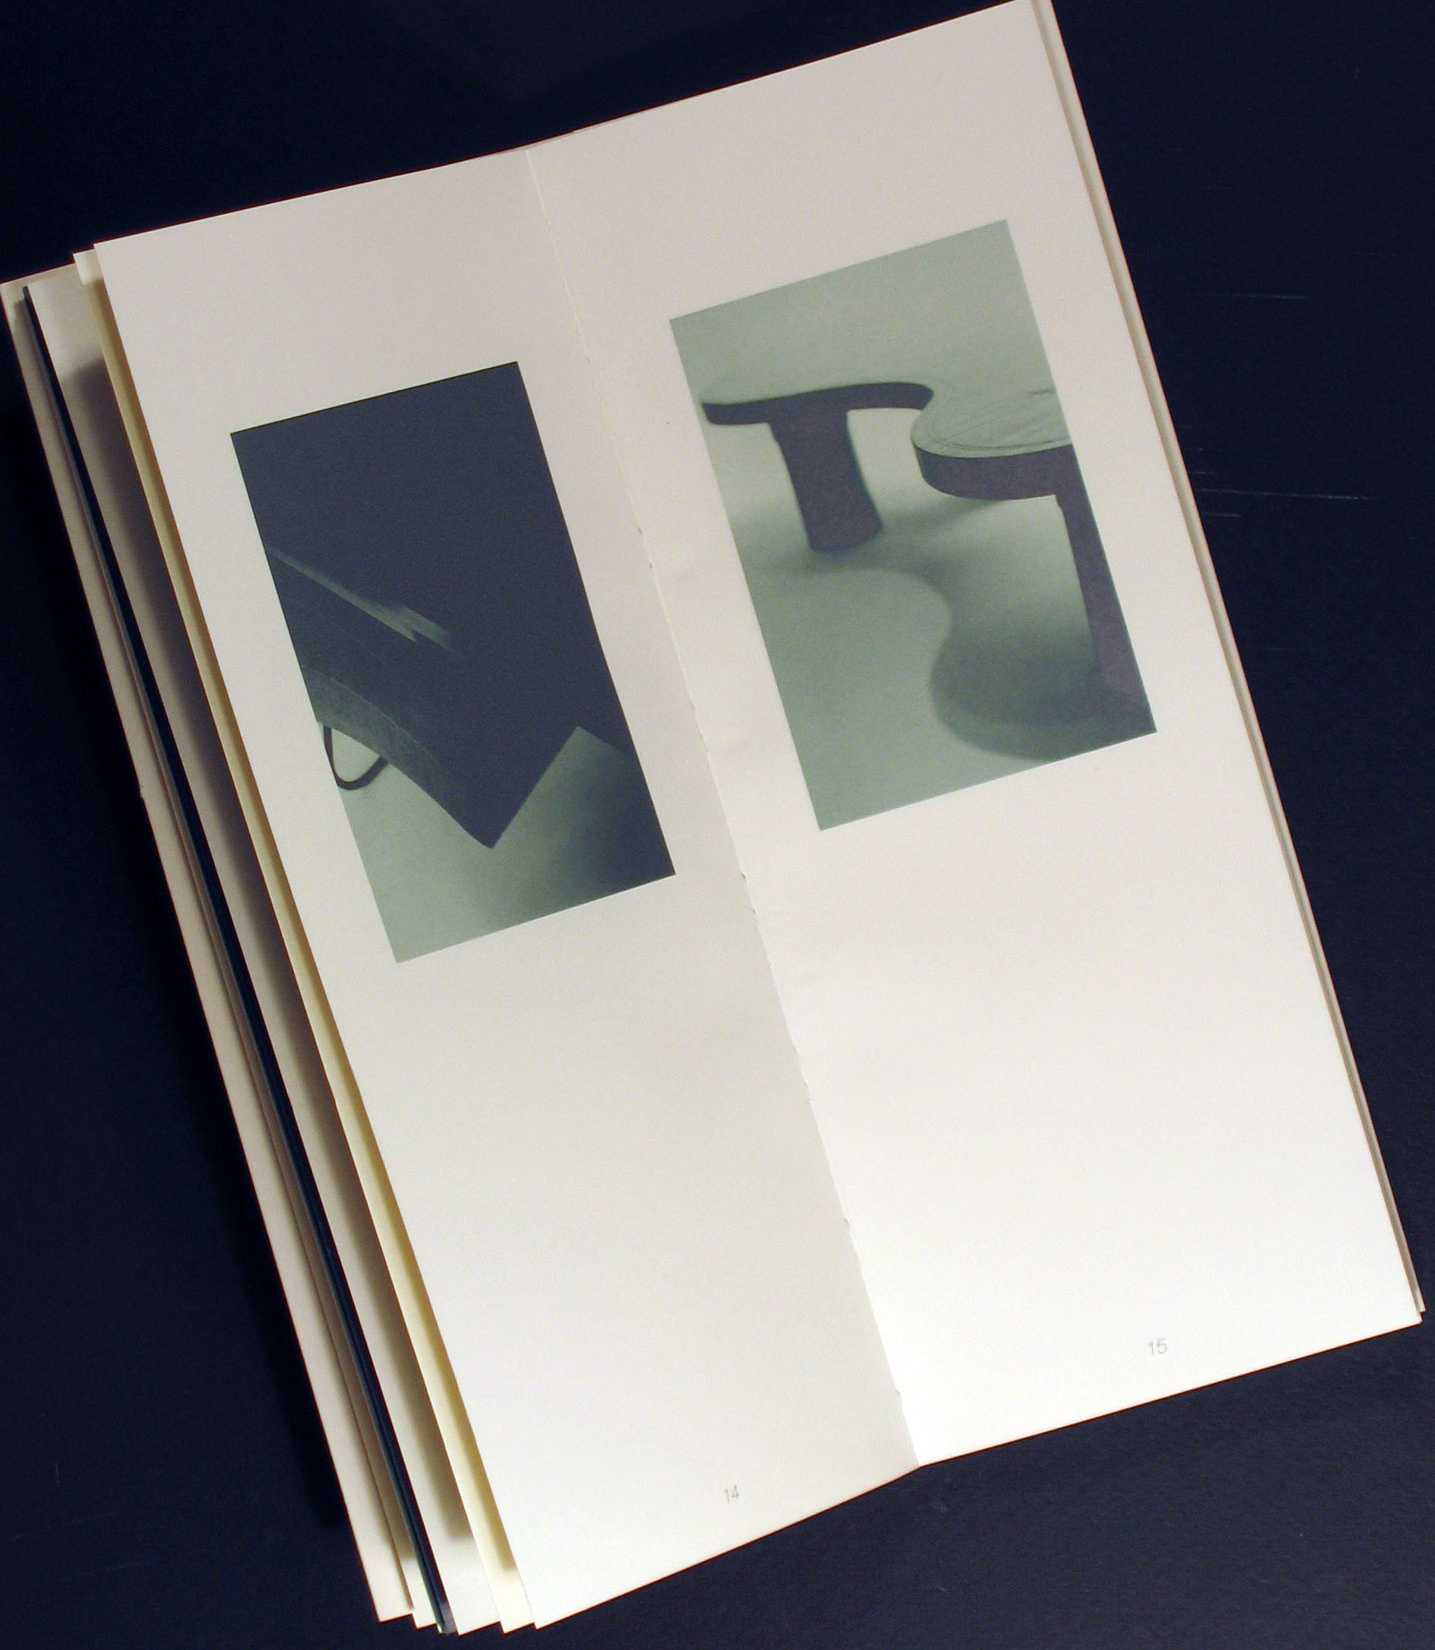 Inside pages of Jean Royére, limited edition monograph designed by Nancy Sharon Collins